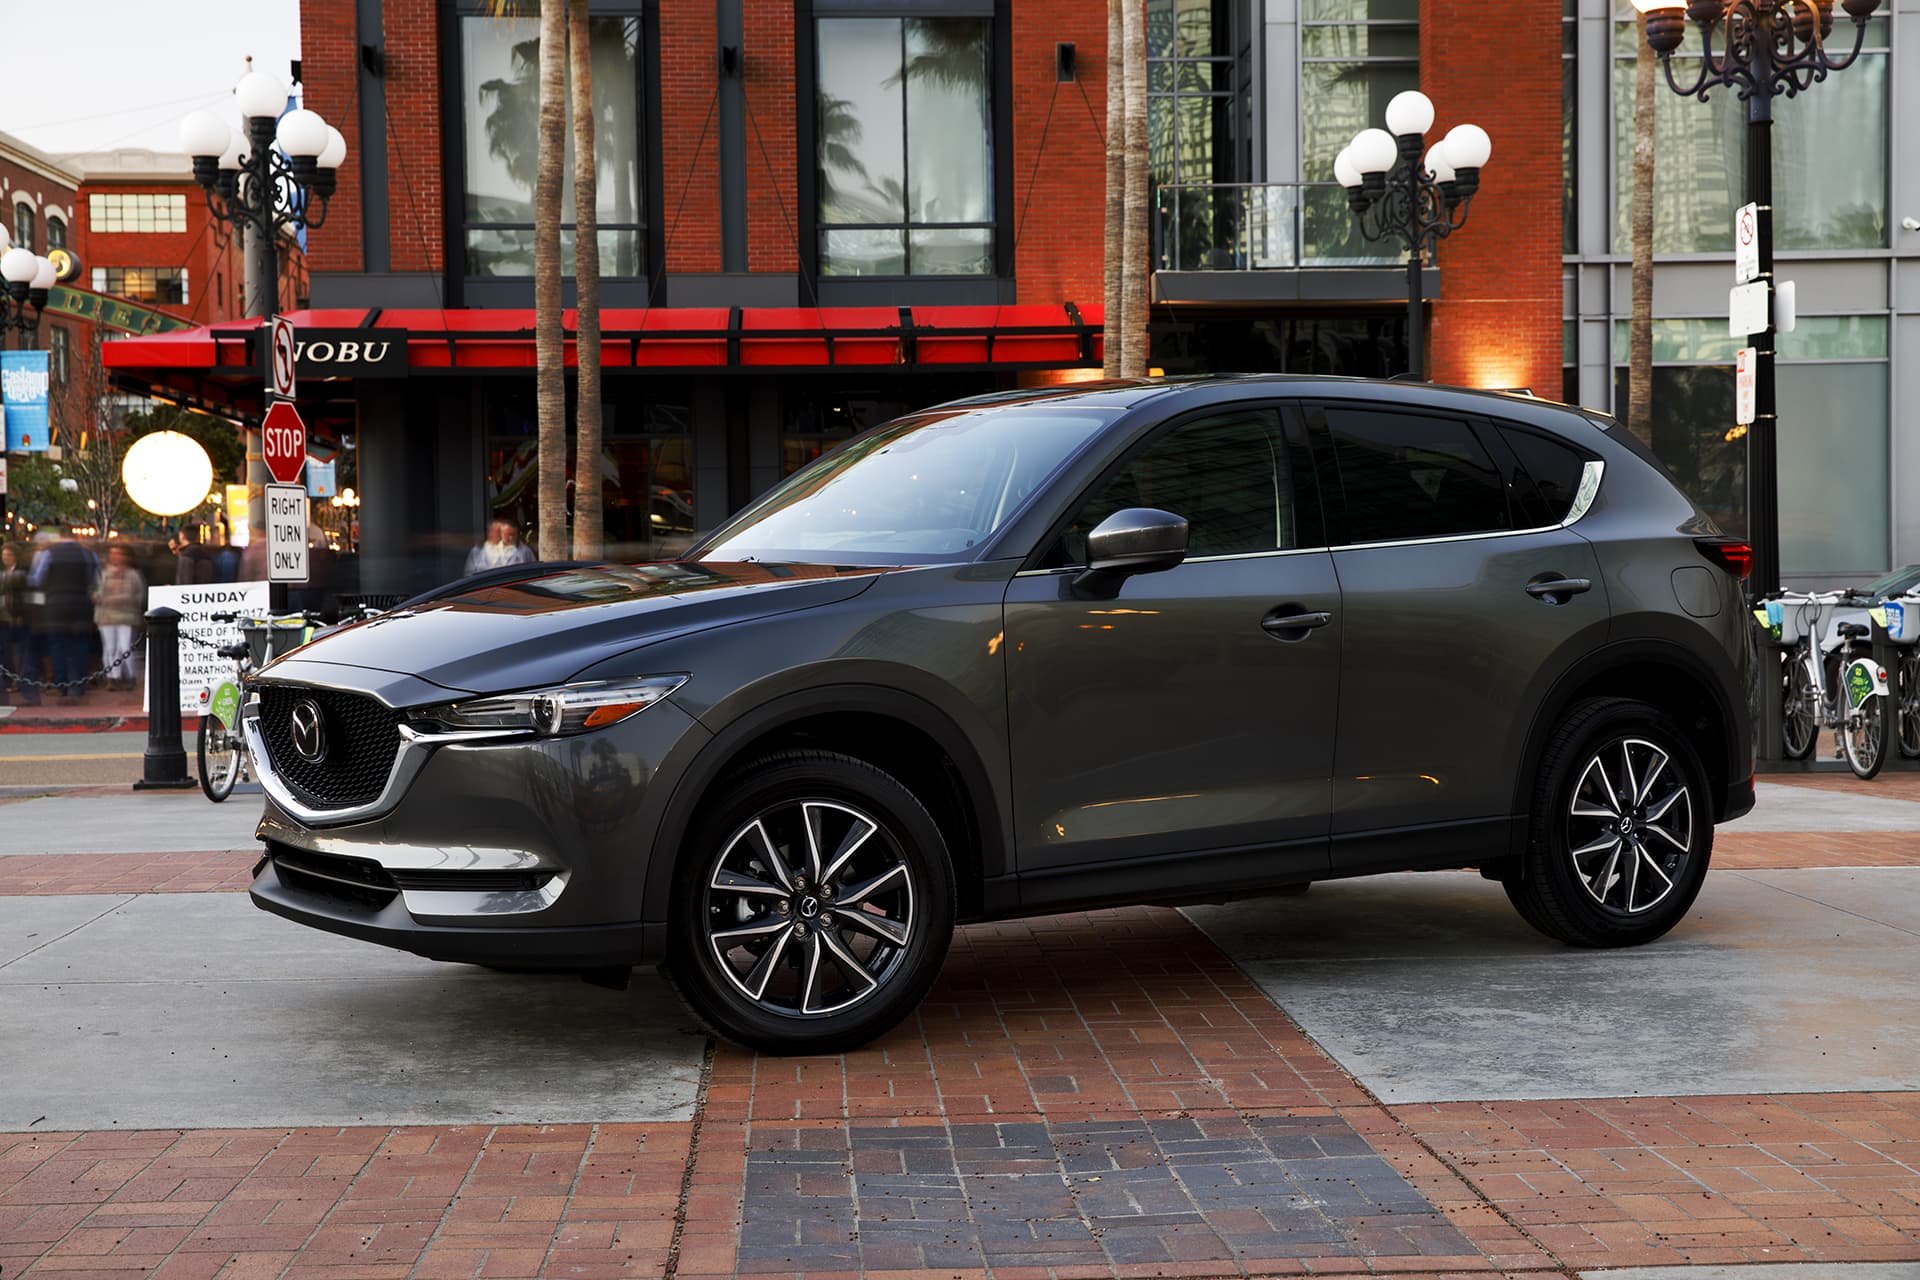 Mazda CX-5 review: One of the best compact crossovers on the market